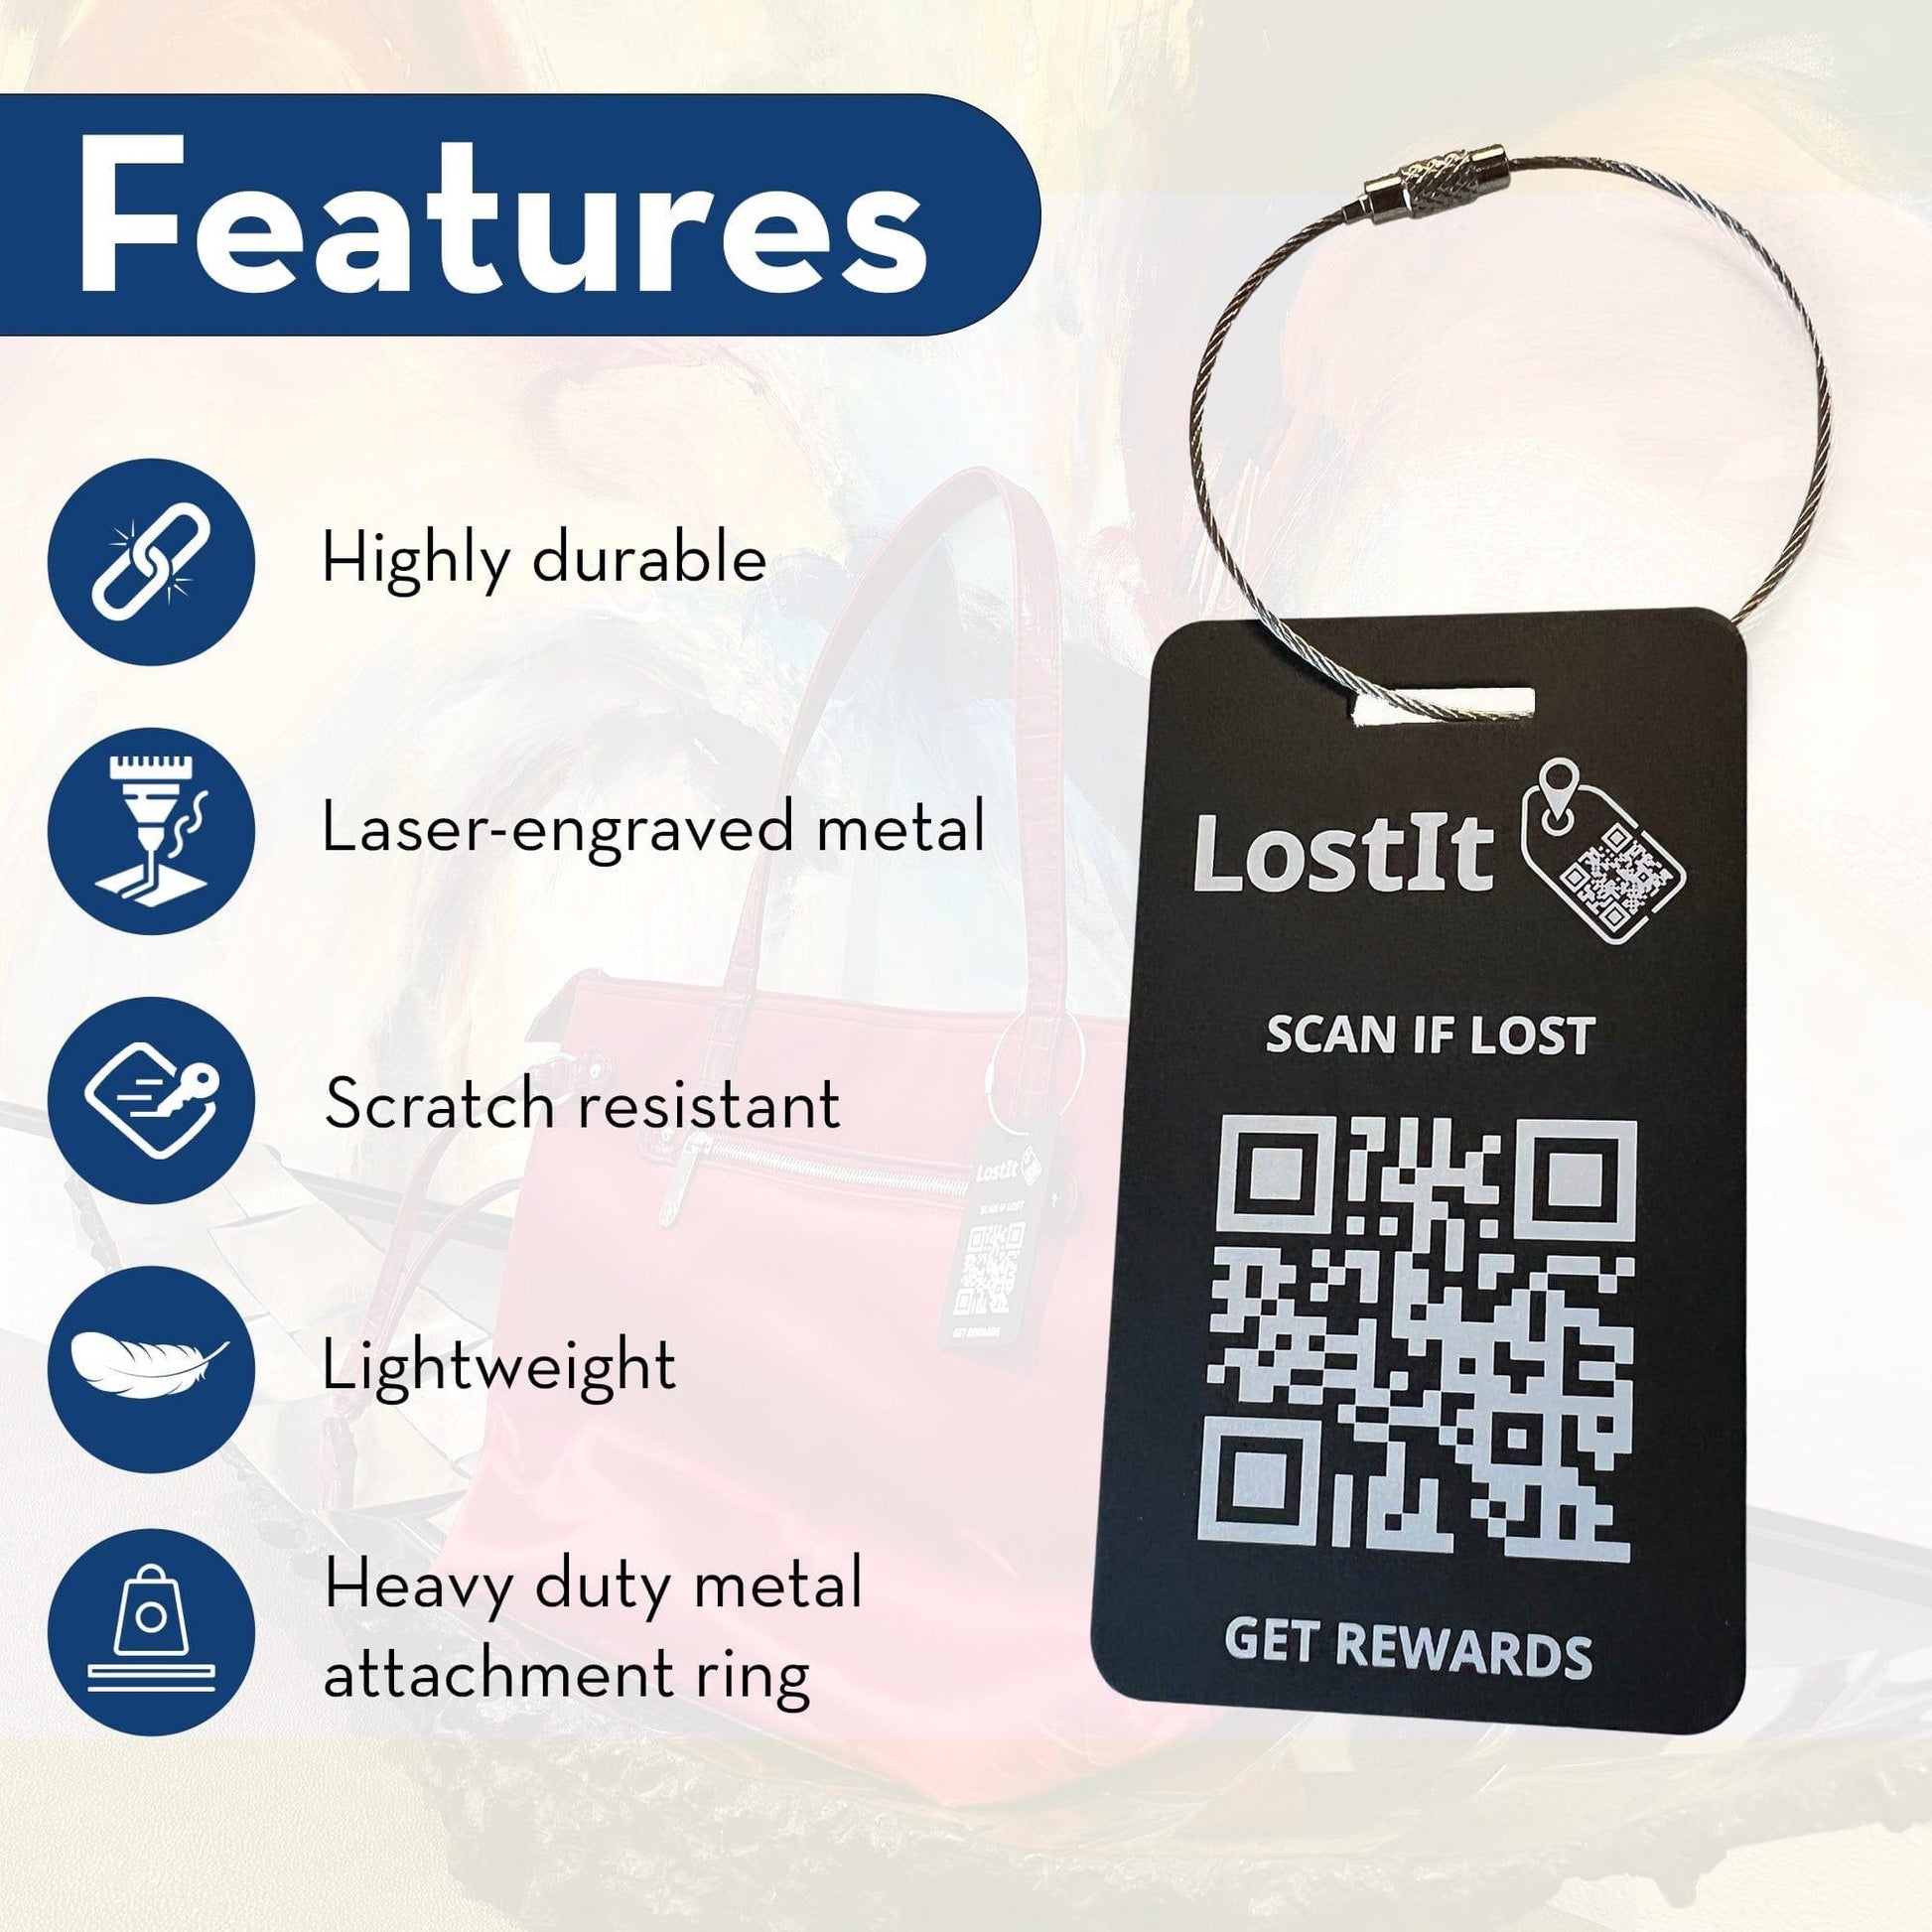 LostIt Tag luggage features include that they are highly durable, laser-engraved metal, scratch resistant, lightweight and has a heavy duty aluminum attachment ring. 